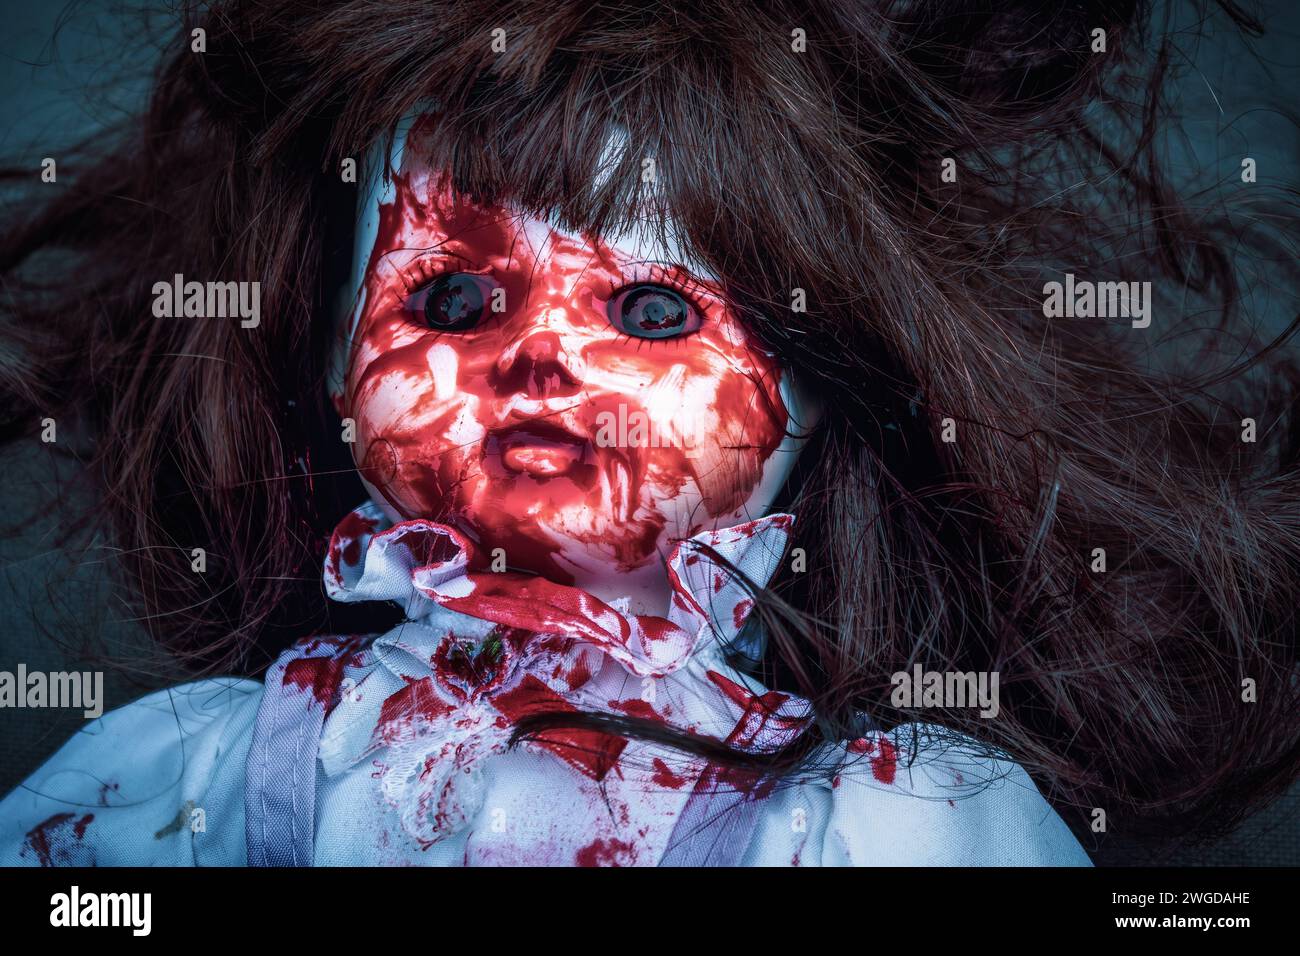 Possessed creepy horror doll with blood smeared all over her face in a cold dark moody tone Stock Photo